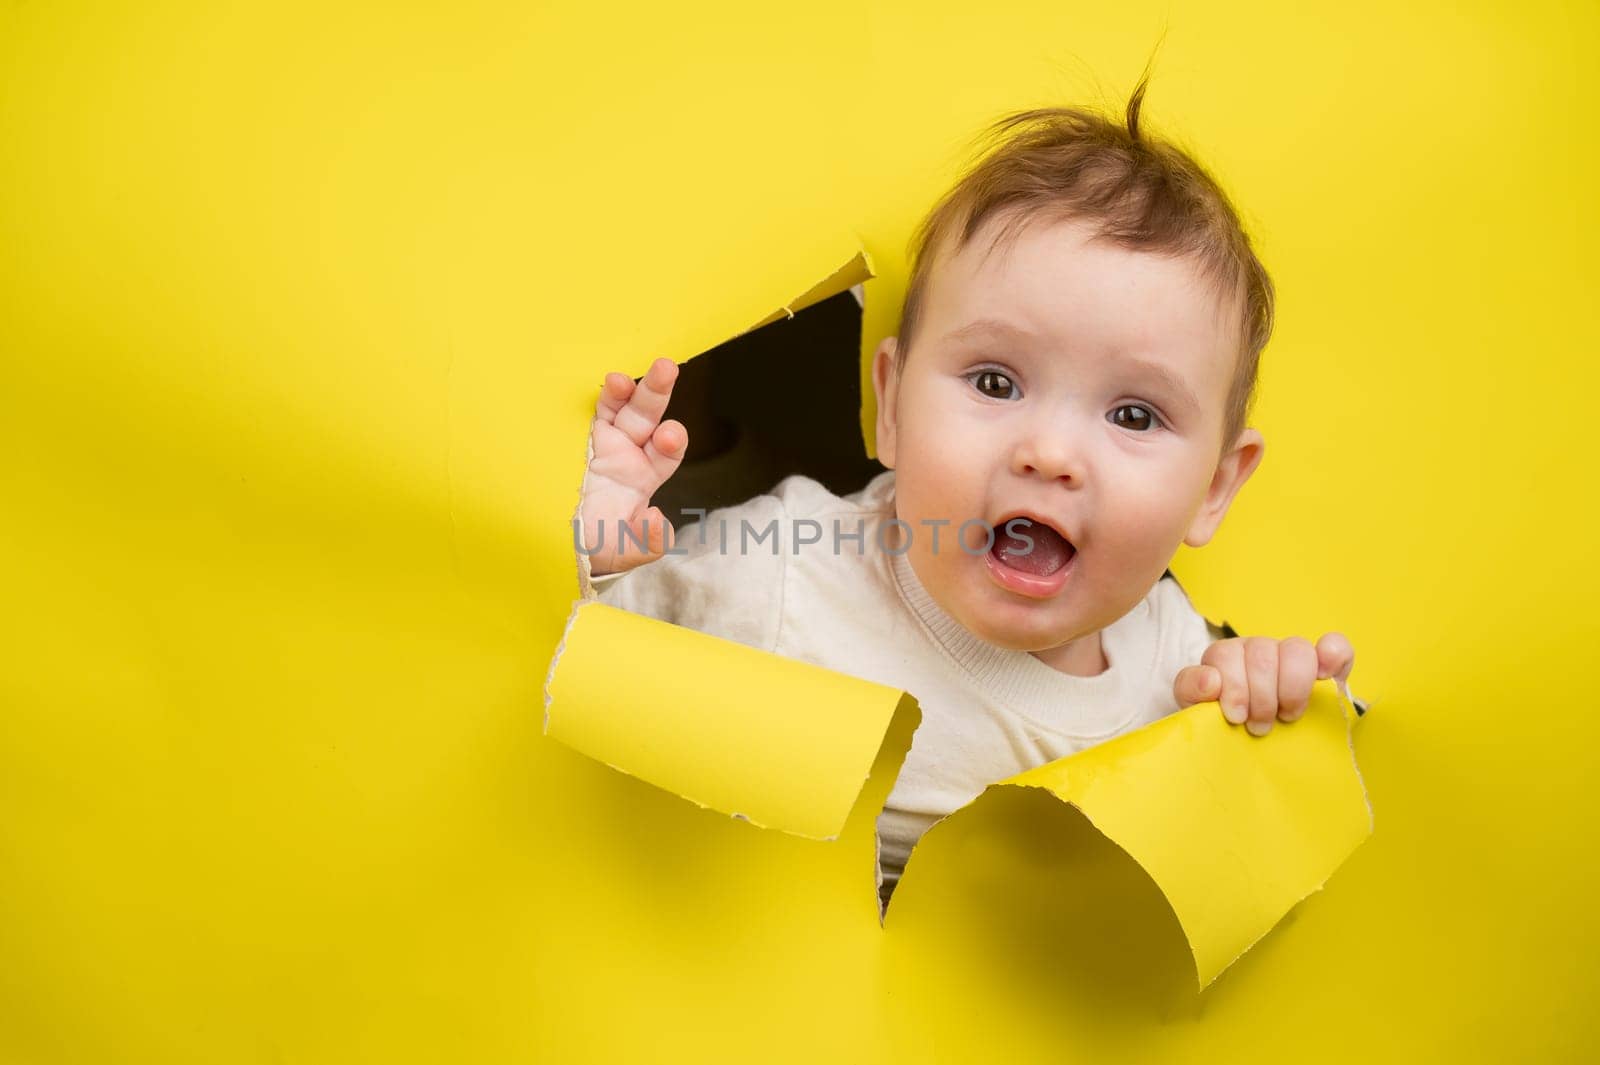 Cute Caucasian baby sticking out of a hole in a paper yellow background